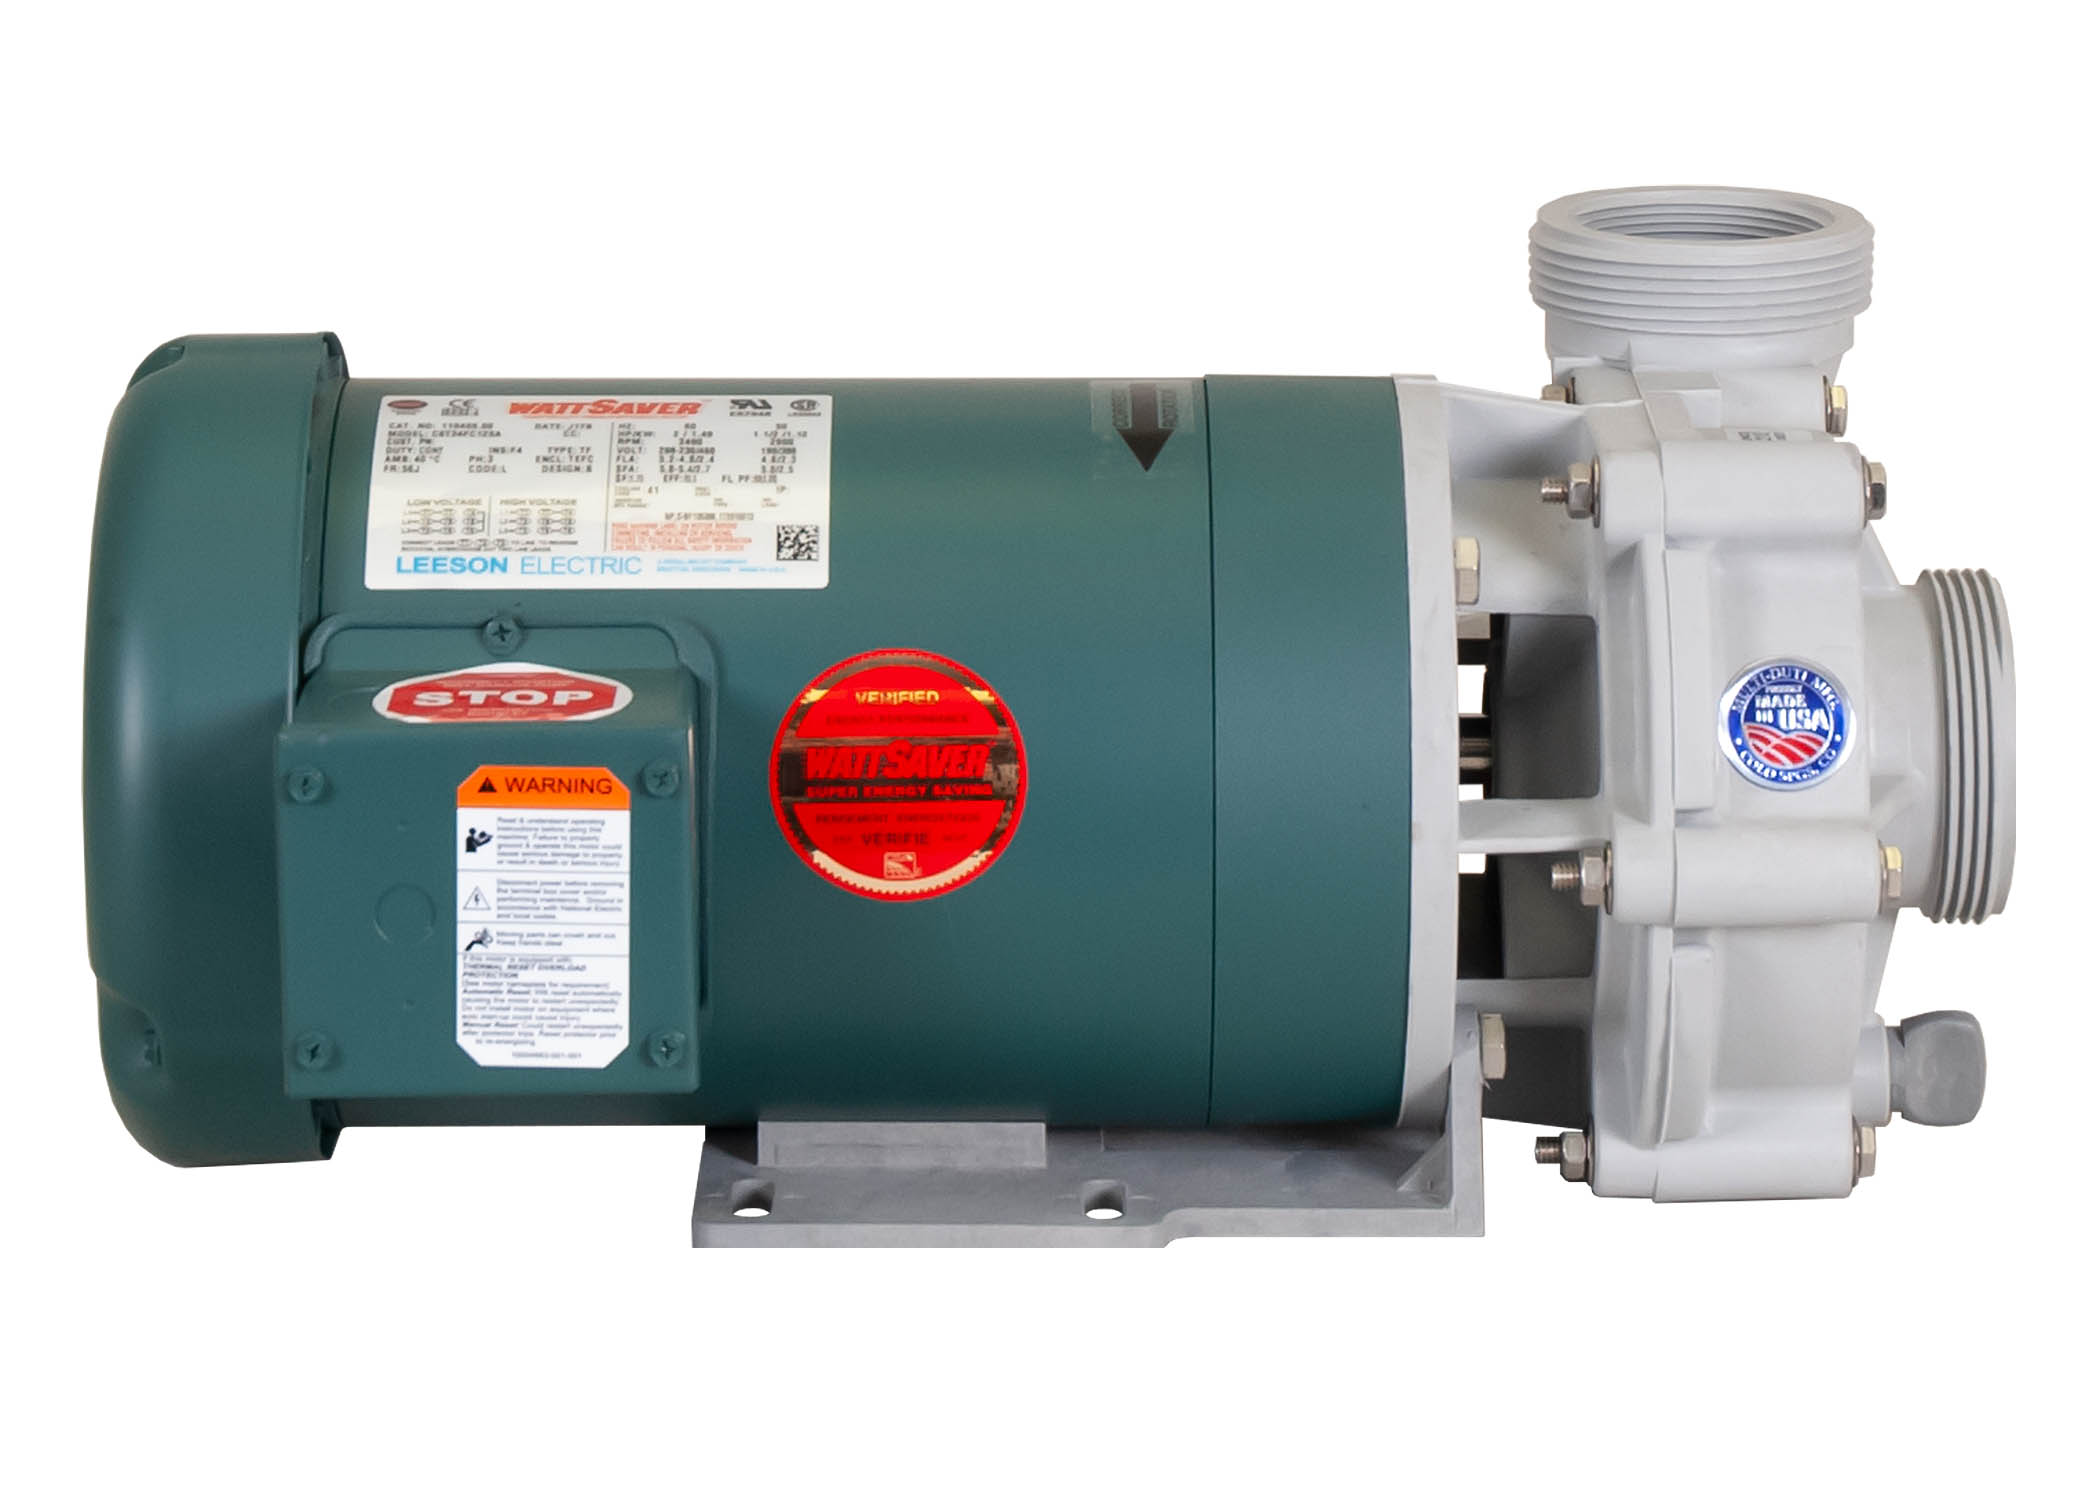 Advance 4000 Pump with green Leeson Motor left side view